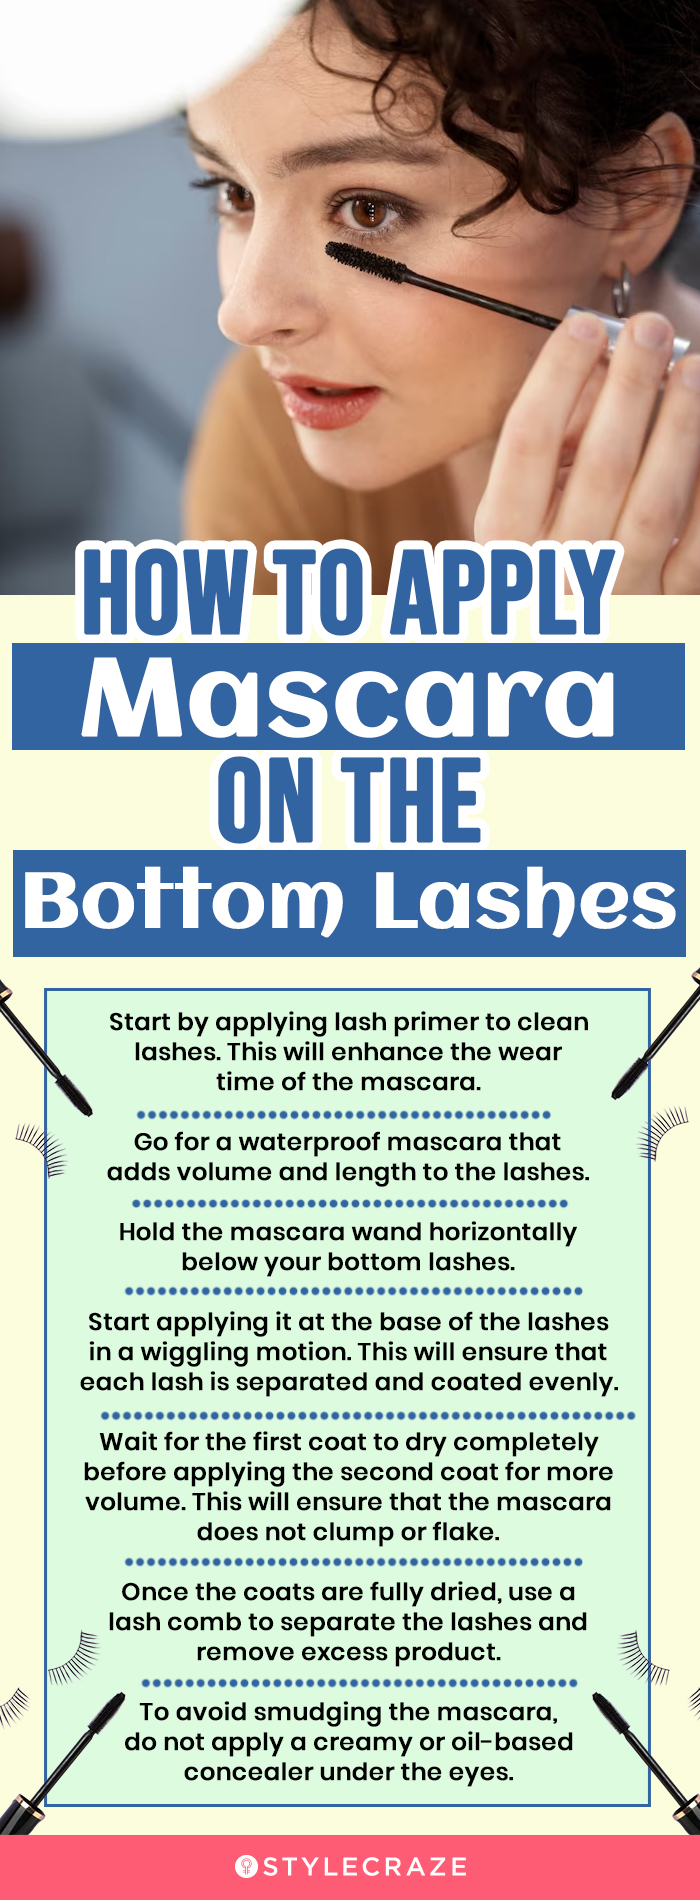 How To Apply Mascara On The Bottom Lashes (infographic)